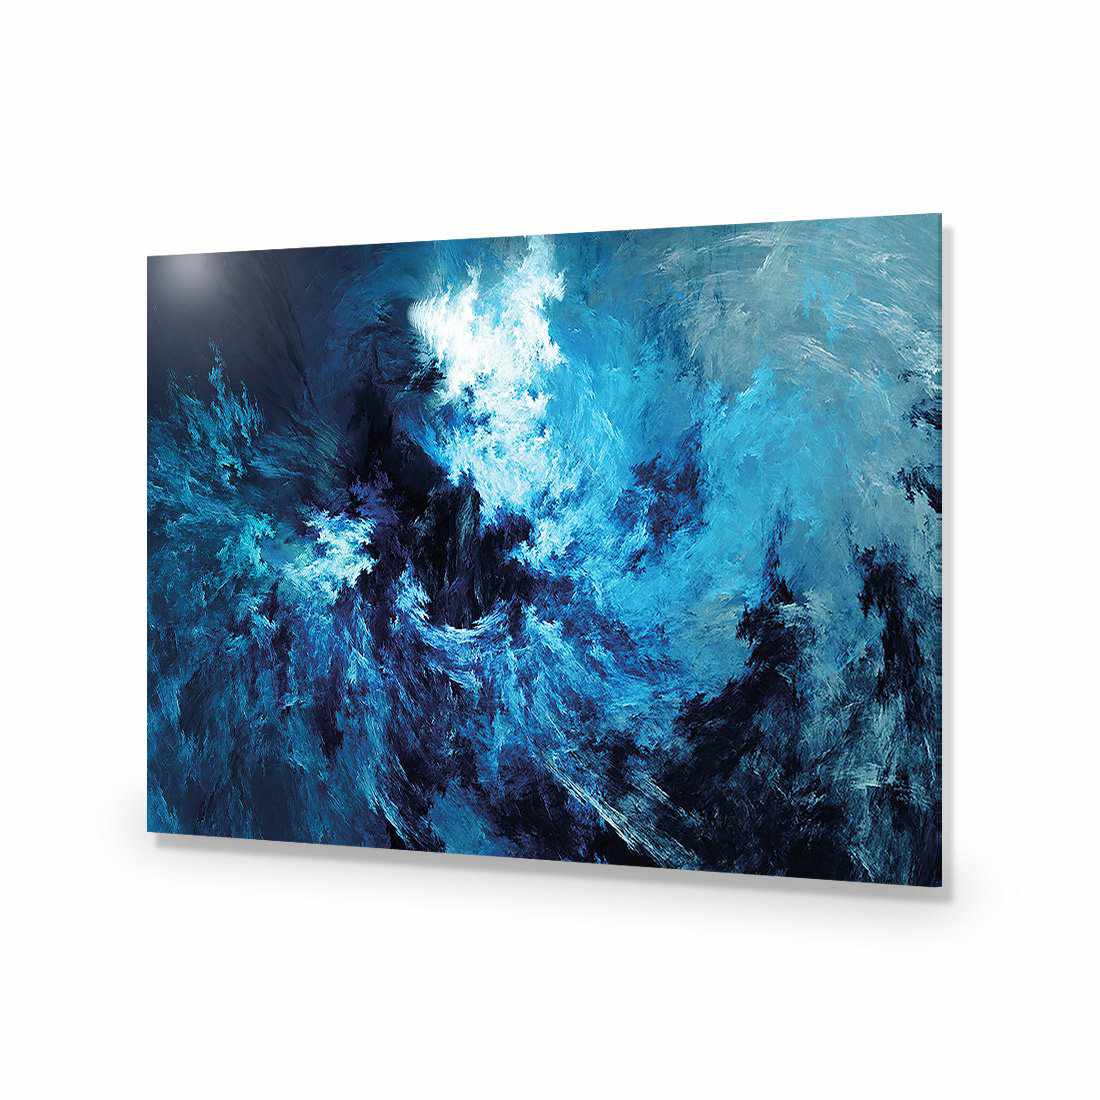 Into the Storm-Acrylic-Wall Art Design-Without Border-Acrylic - No Frame-45x30cm-Wall Art Designs